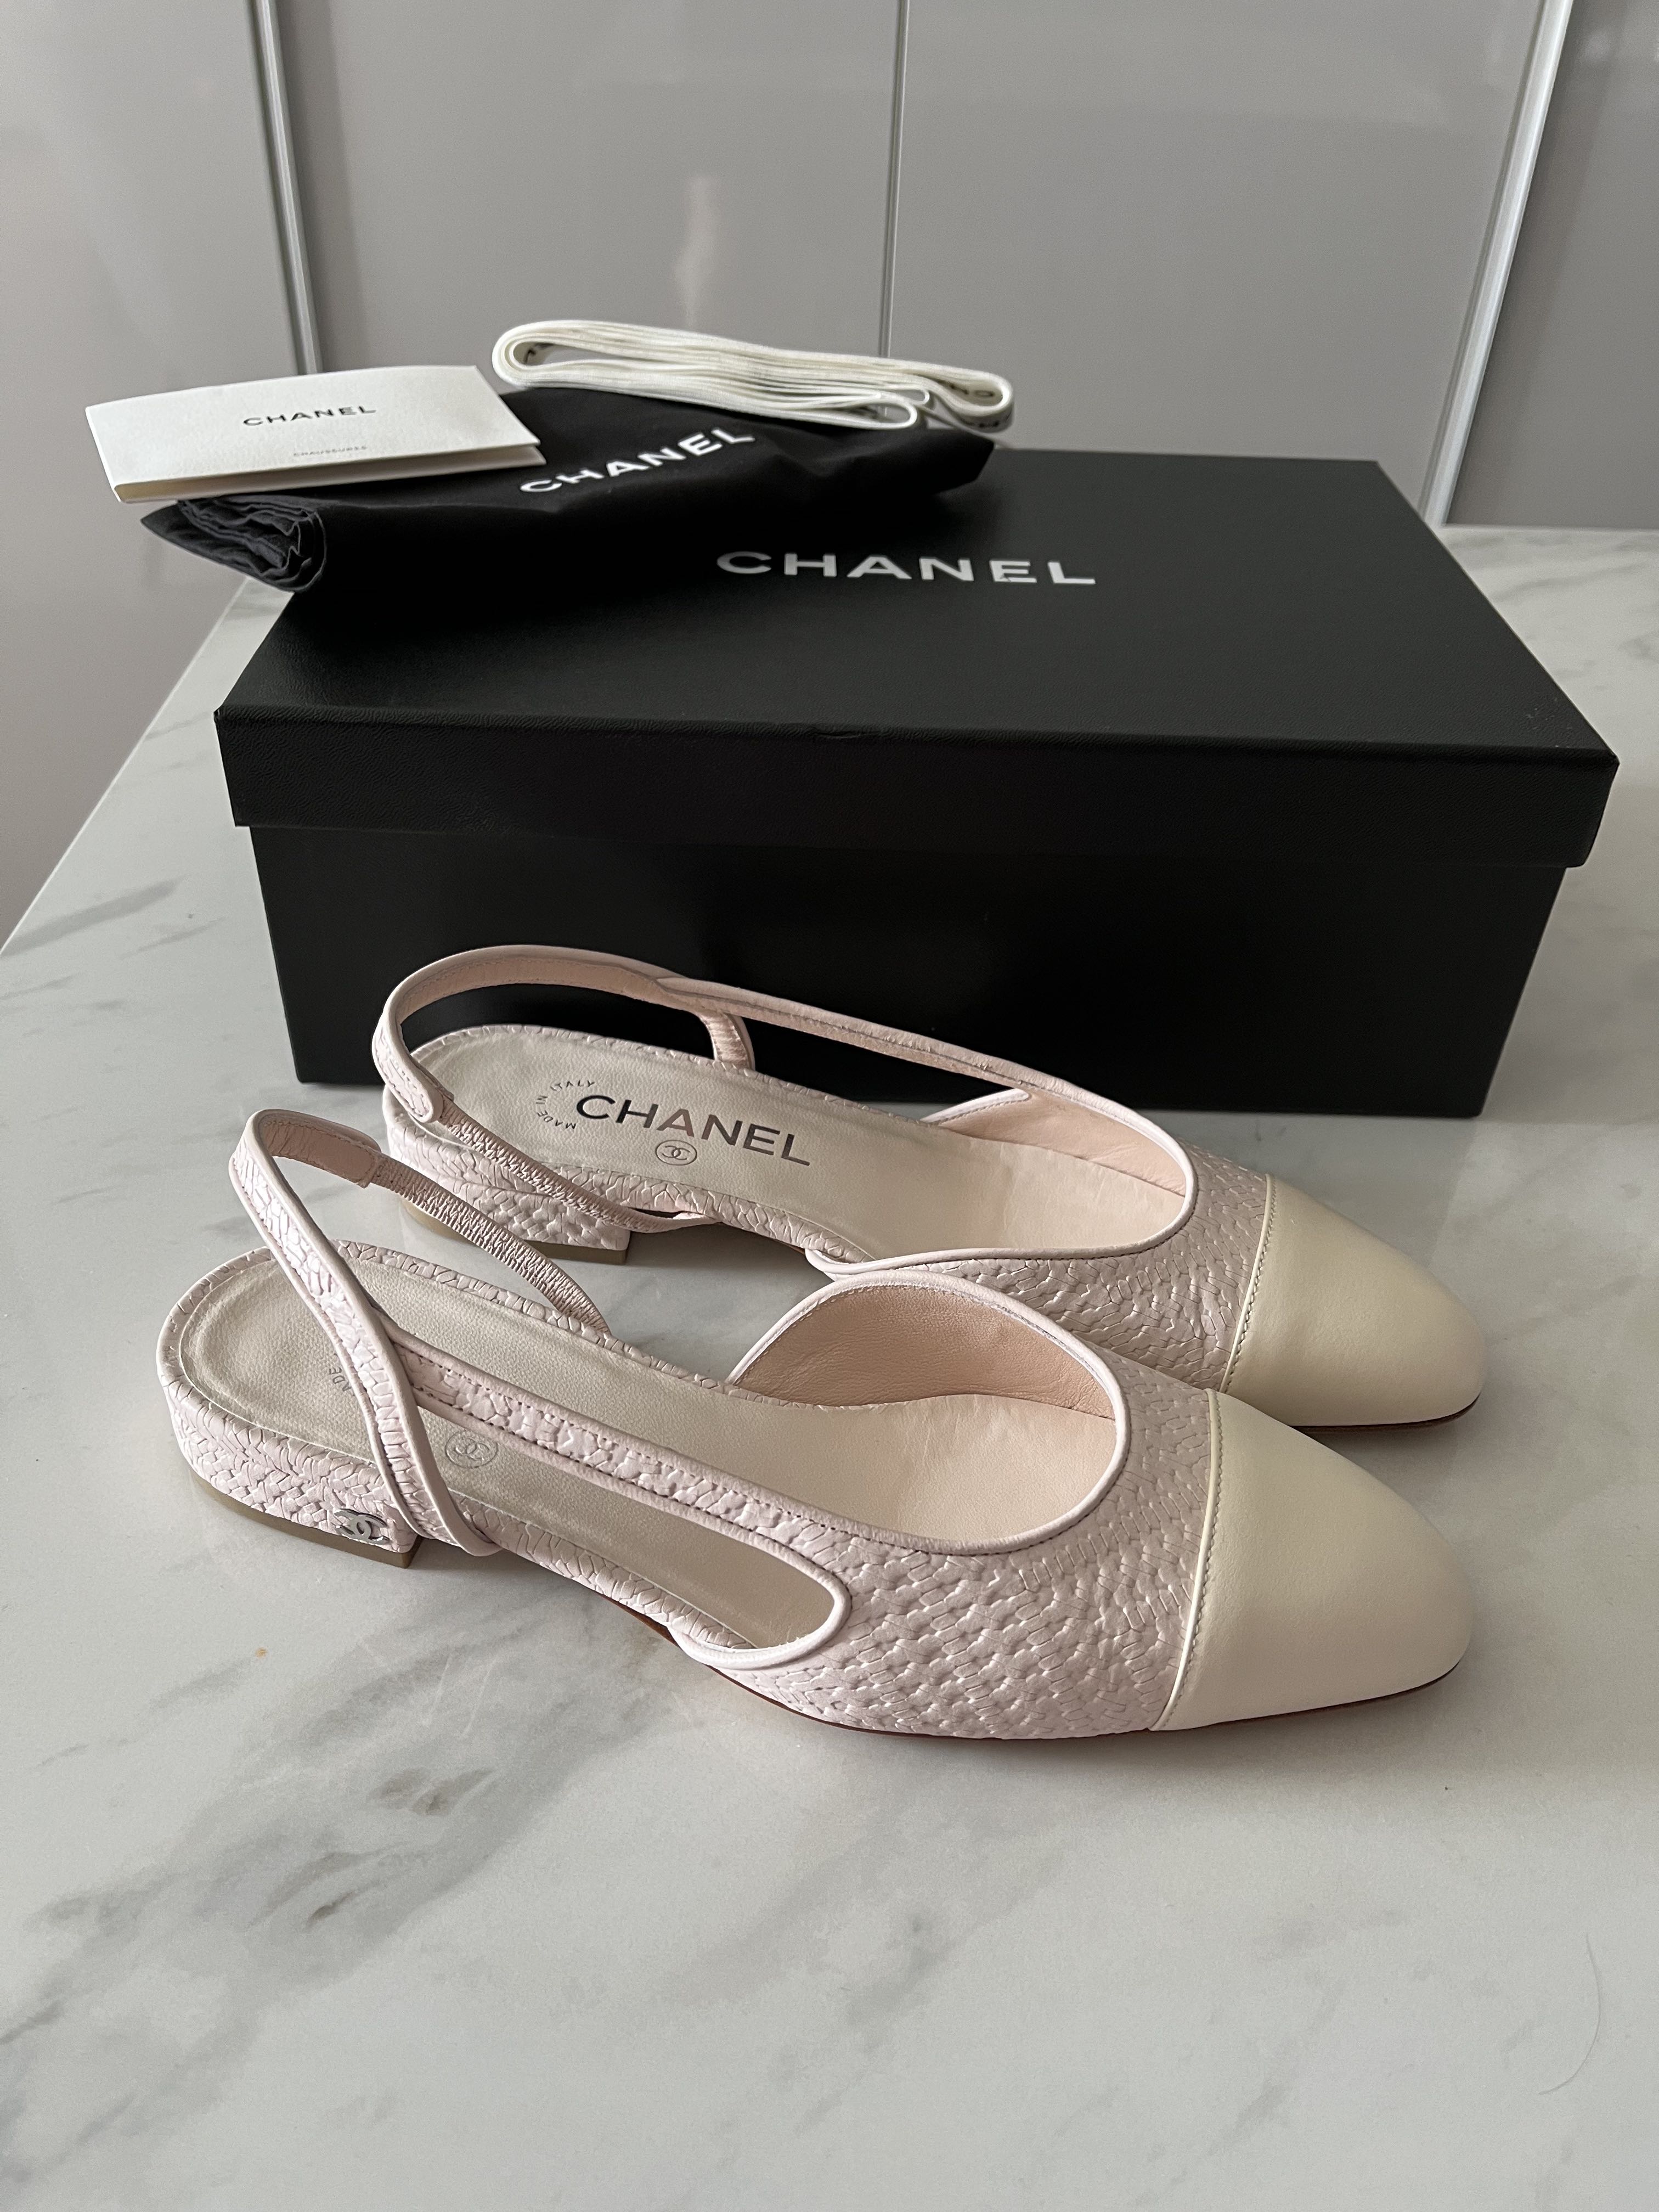 Chanel Slingback Heels Review – To tweed or not to tweed? - Unwrapped